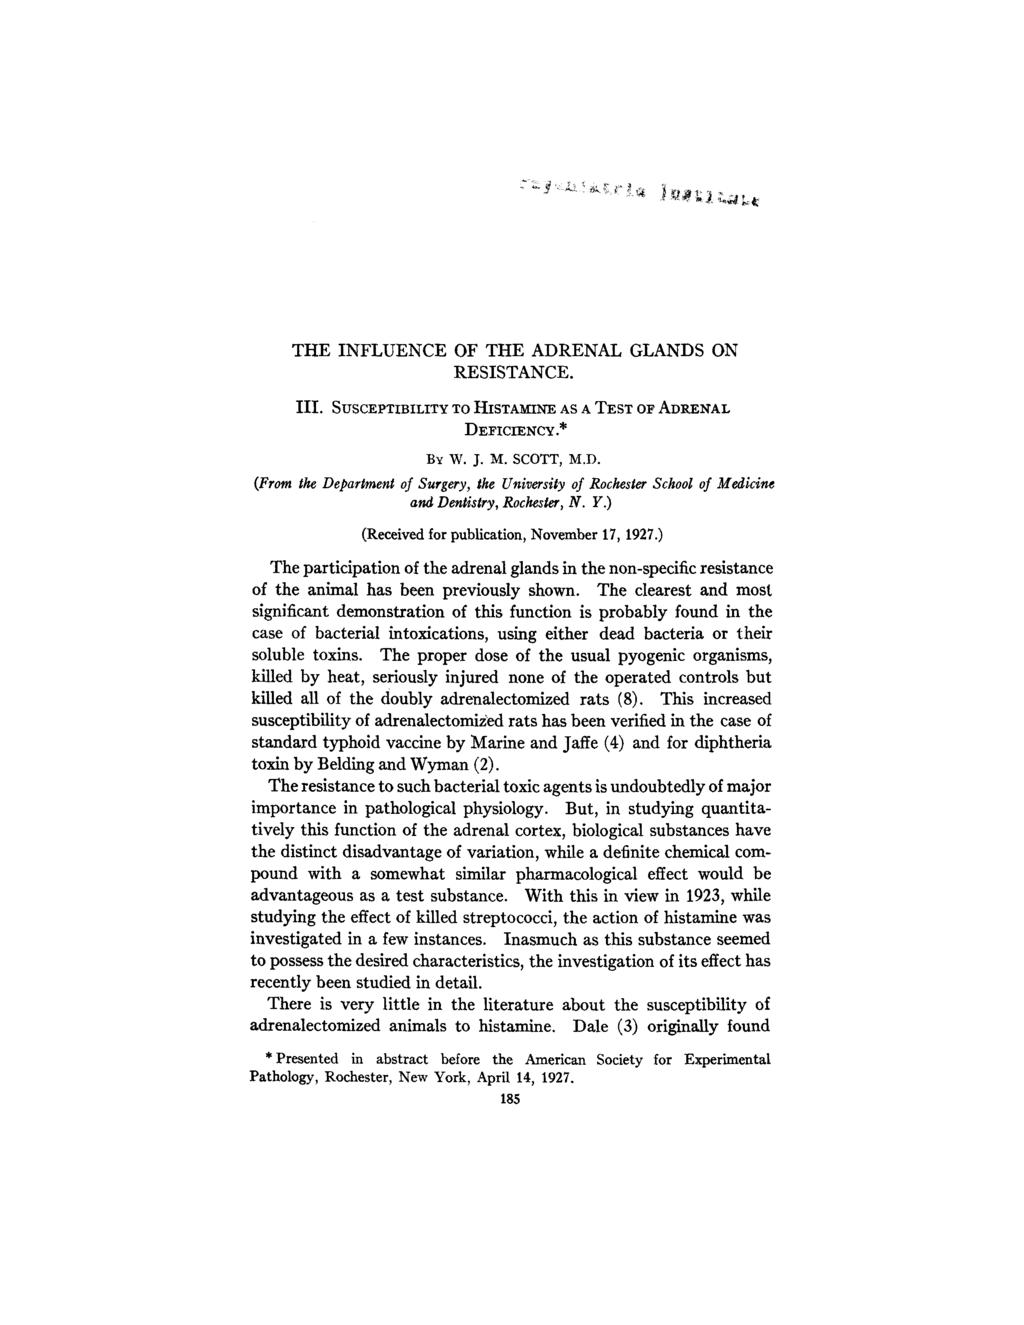 Published Online: 1 February, 1928 Supp Info: http://doi.org/10.1084/jem.47.2.185 Downloaded from jem.rupress.org on October 26, 2018 THE INFLUENCE OF THE ADRENAL GLANDS ON RESISTANCE. III.